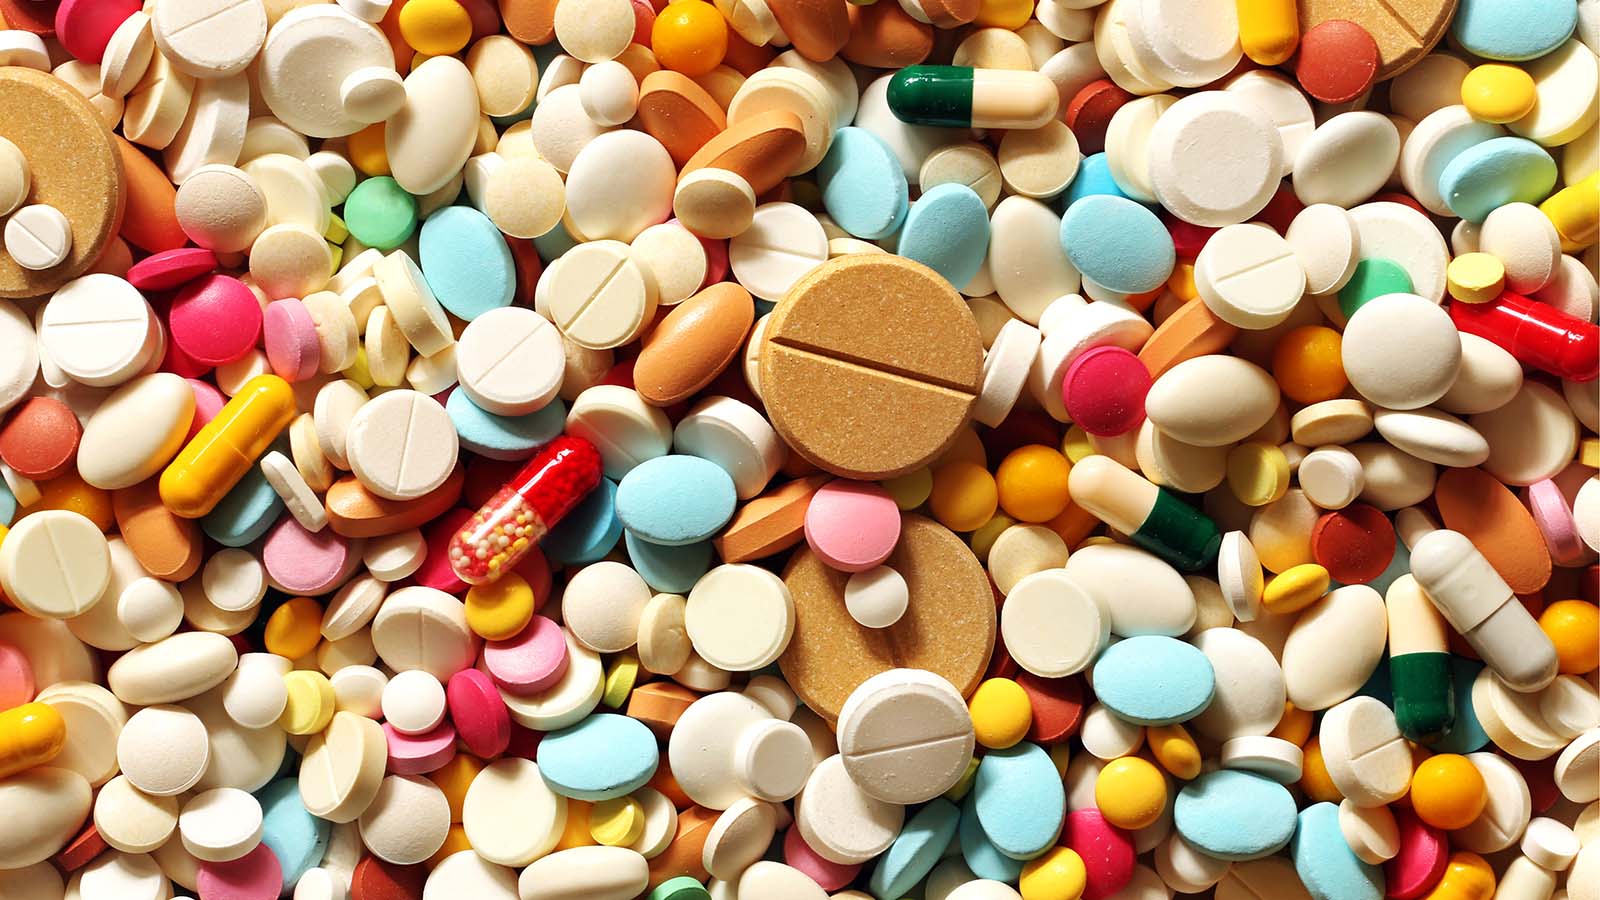 A pile of brightly colored pills in varying sizes and shapes representing BPTS stock.